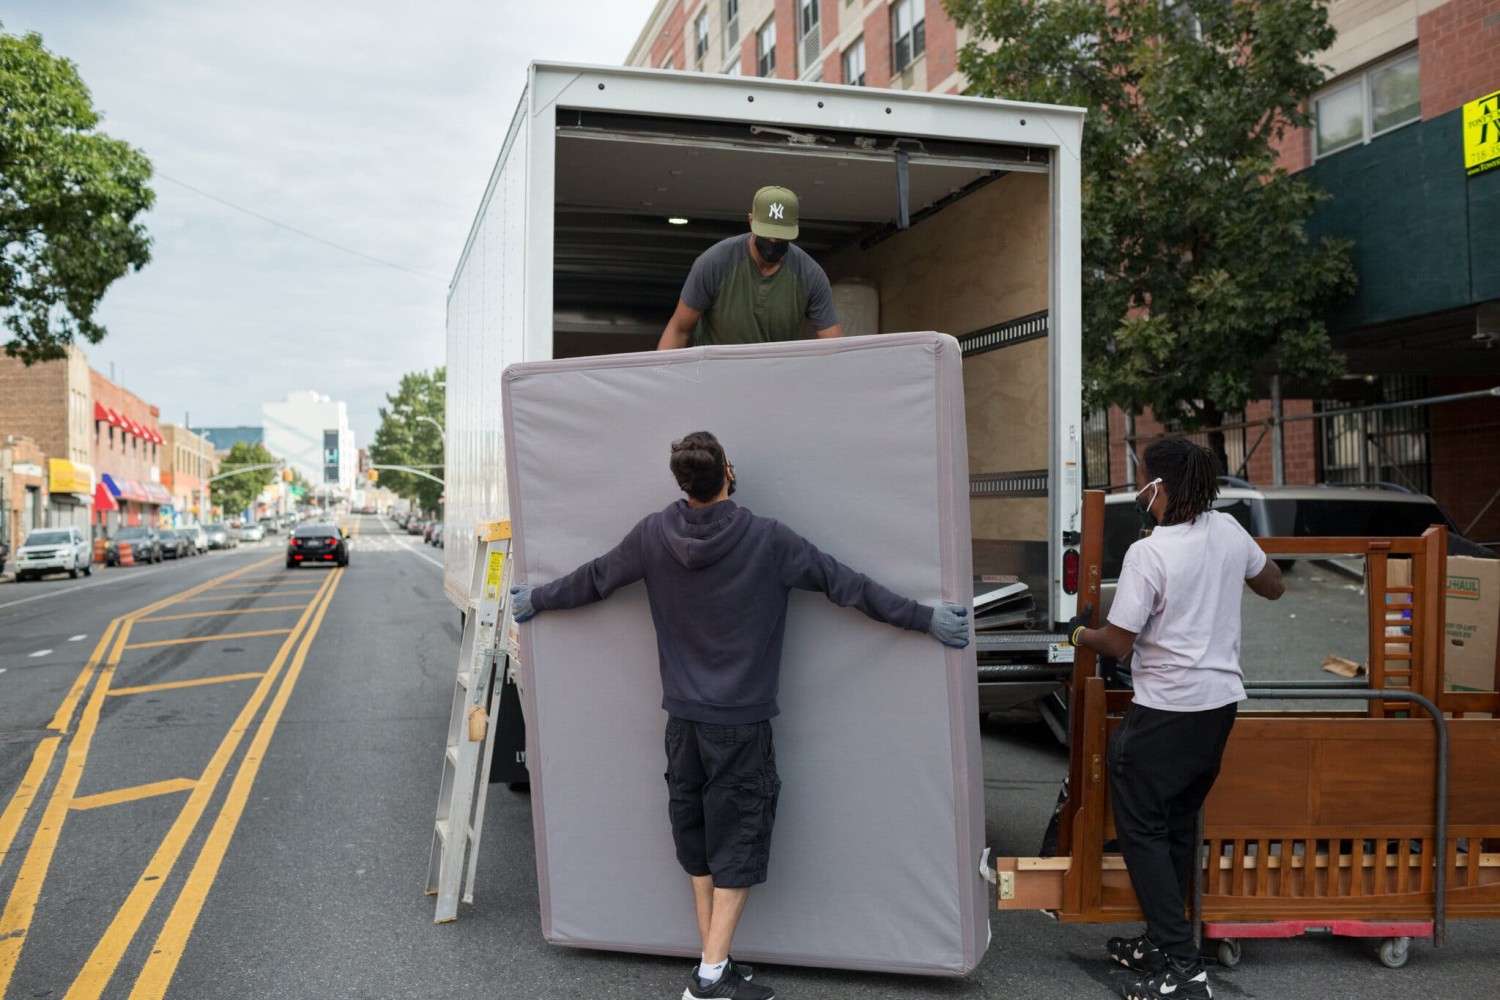 People think movers “are like flies on the wall,” said one owner of a moving company, “so they don’t hesitate to have very open conversations with each other in front of you.”Credit...Anna Watts for The New York Times